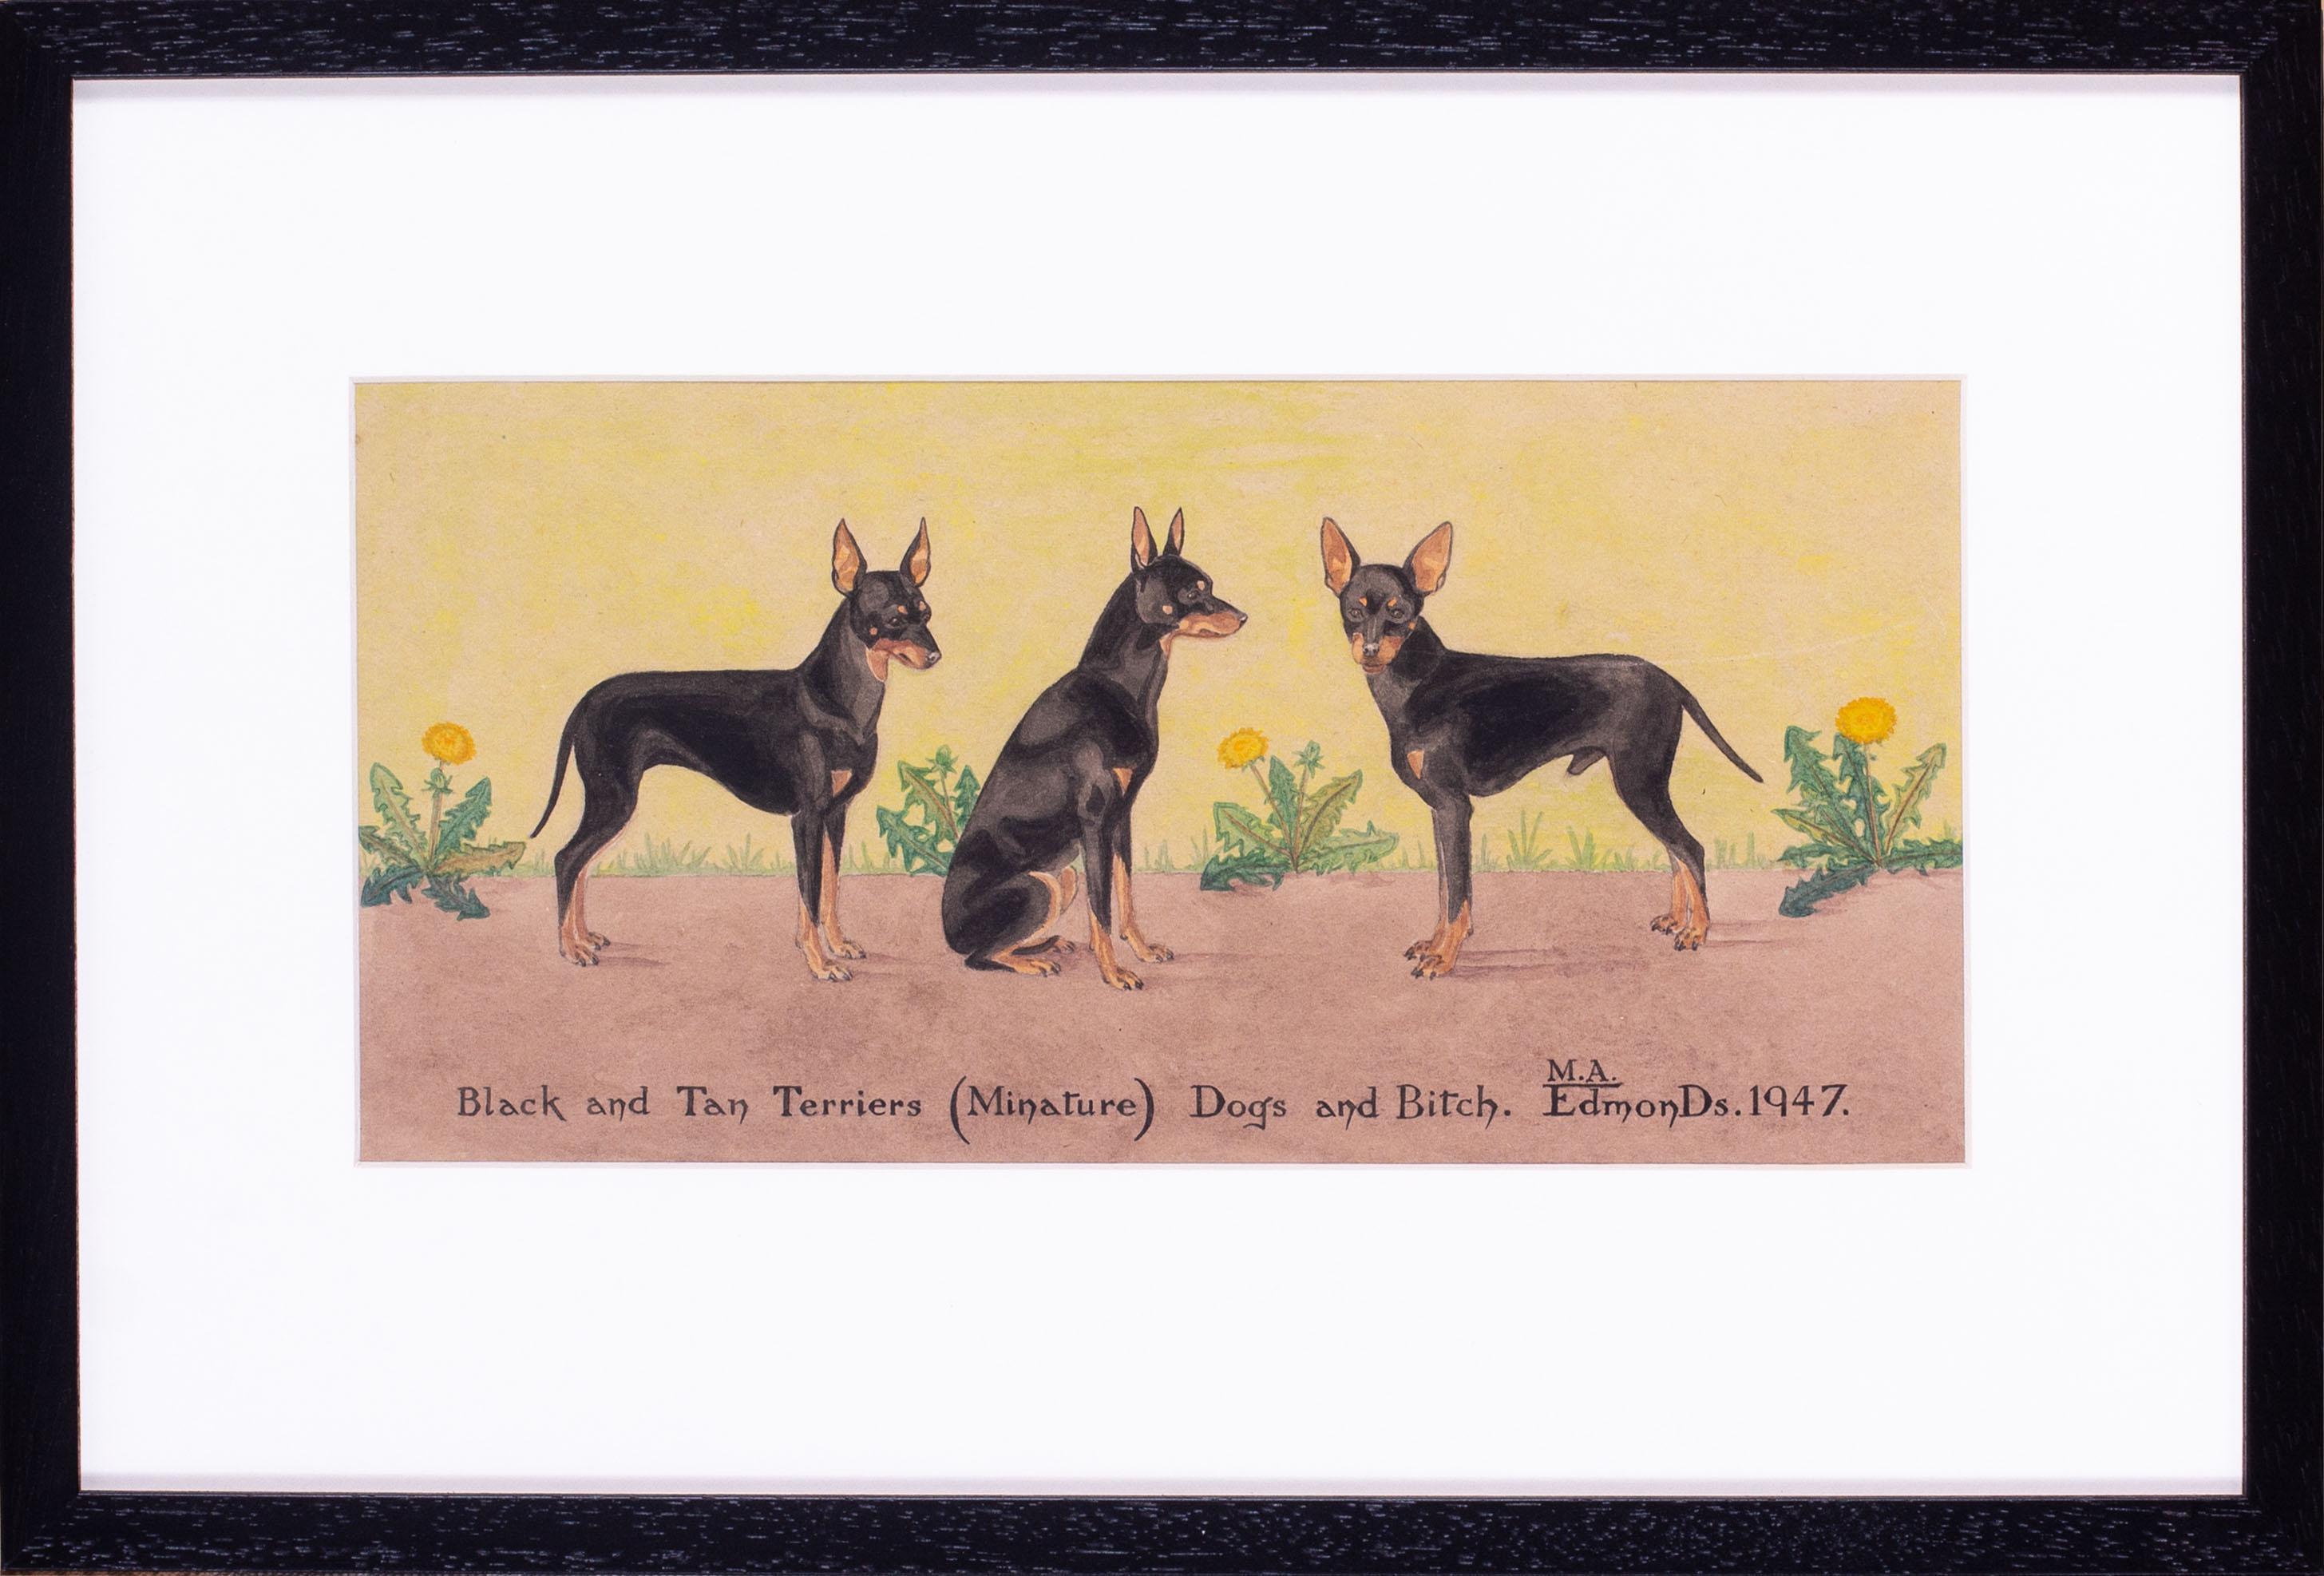 Mona Alizon Edmonds Animal Art - British mid century watercolour and pen drawing of black and tan terrier dogs